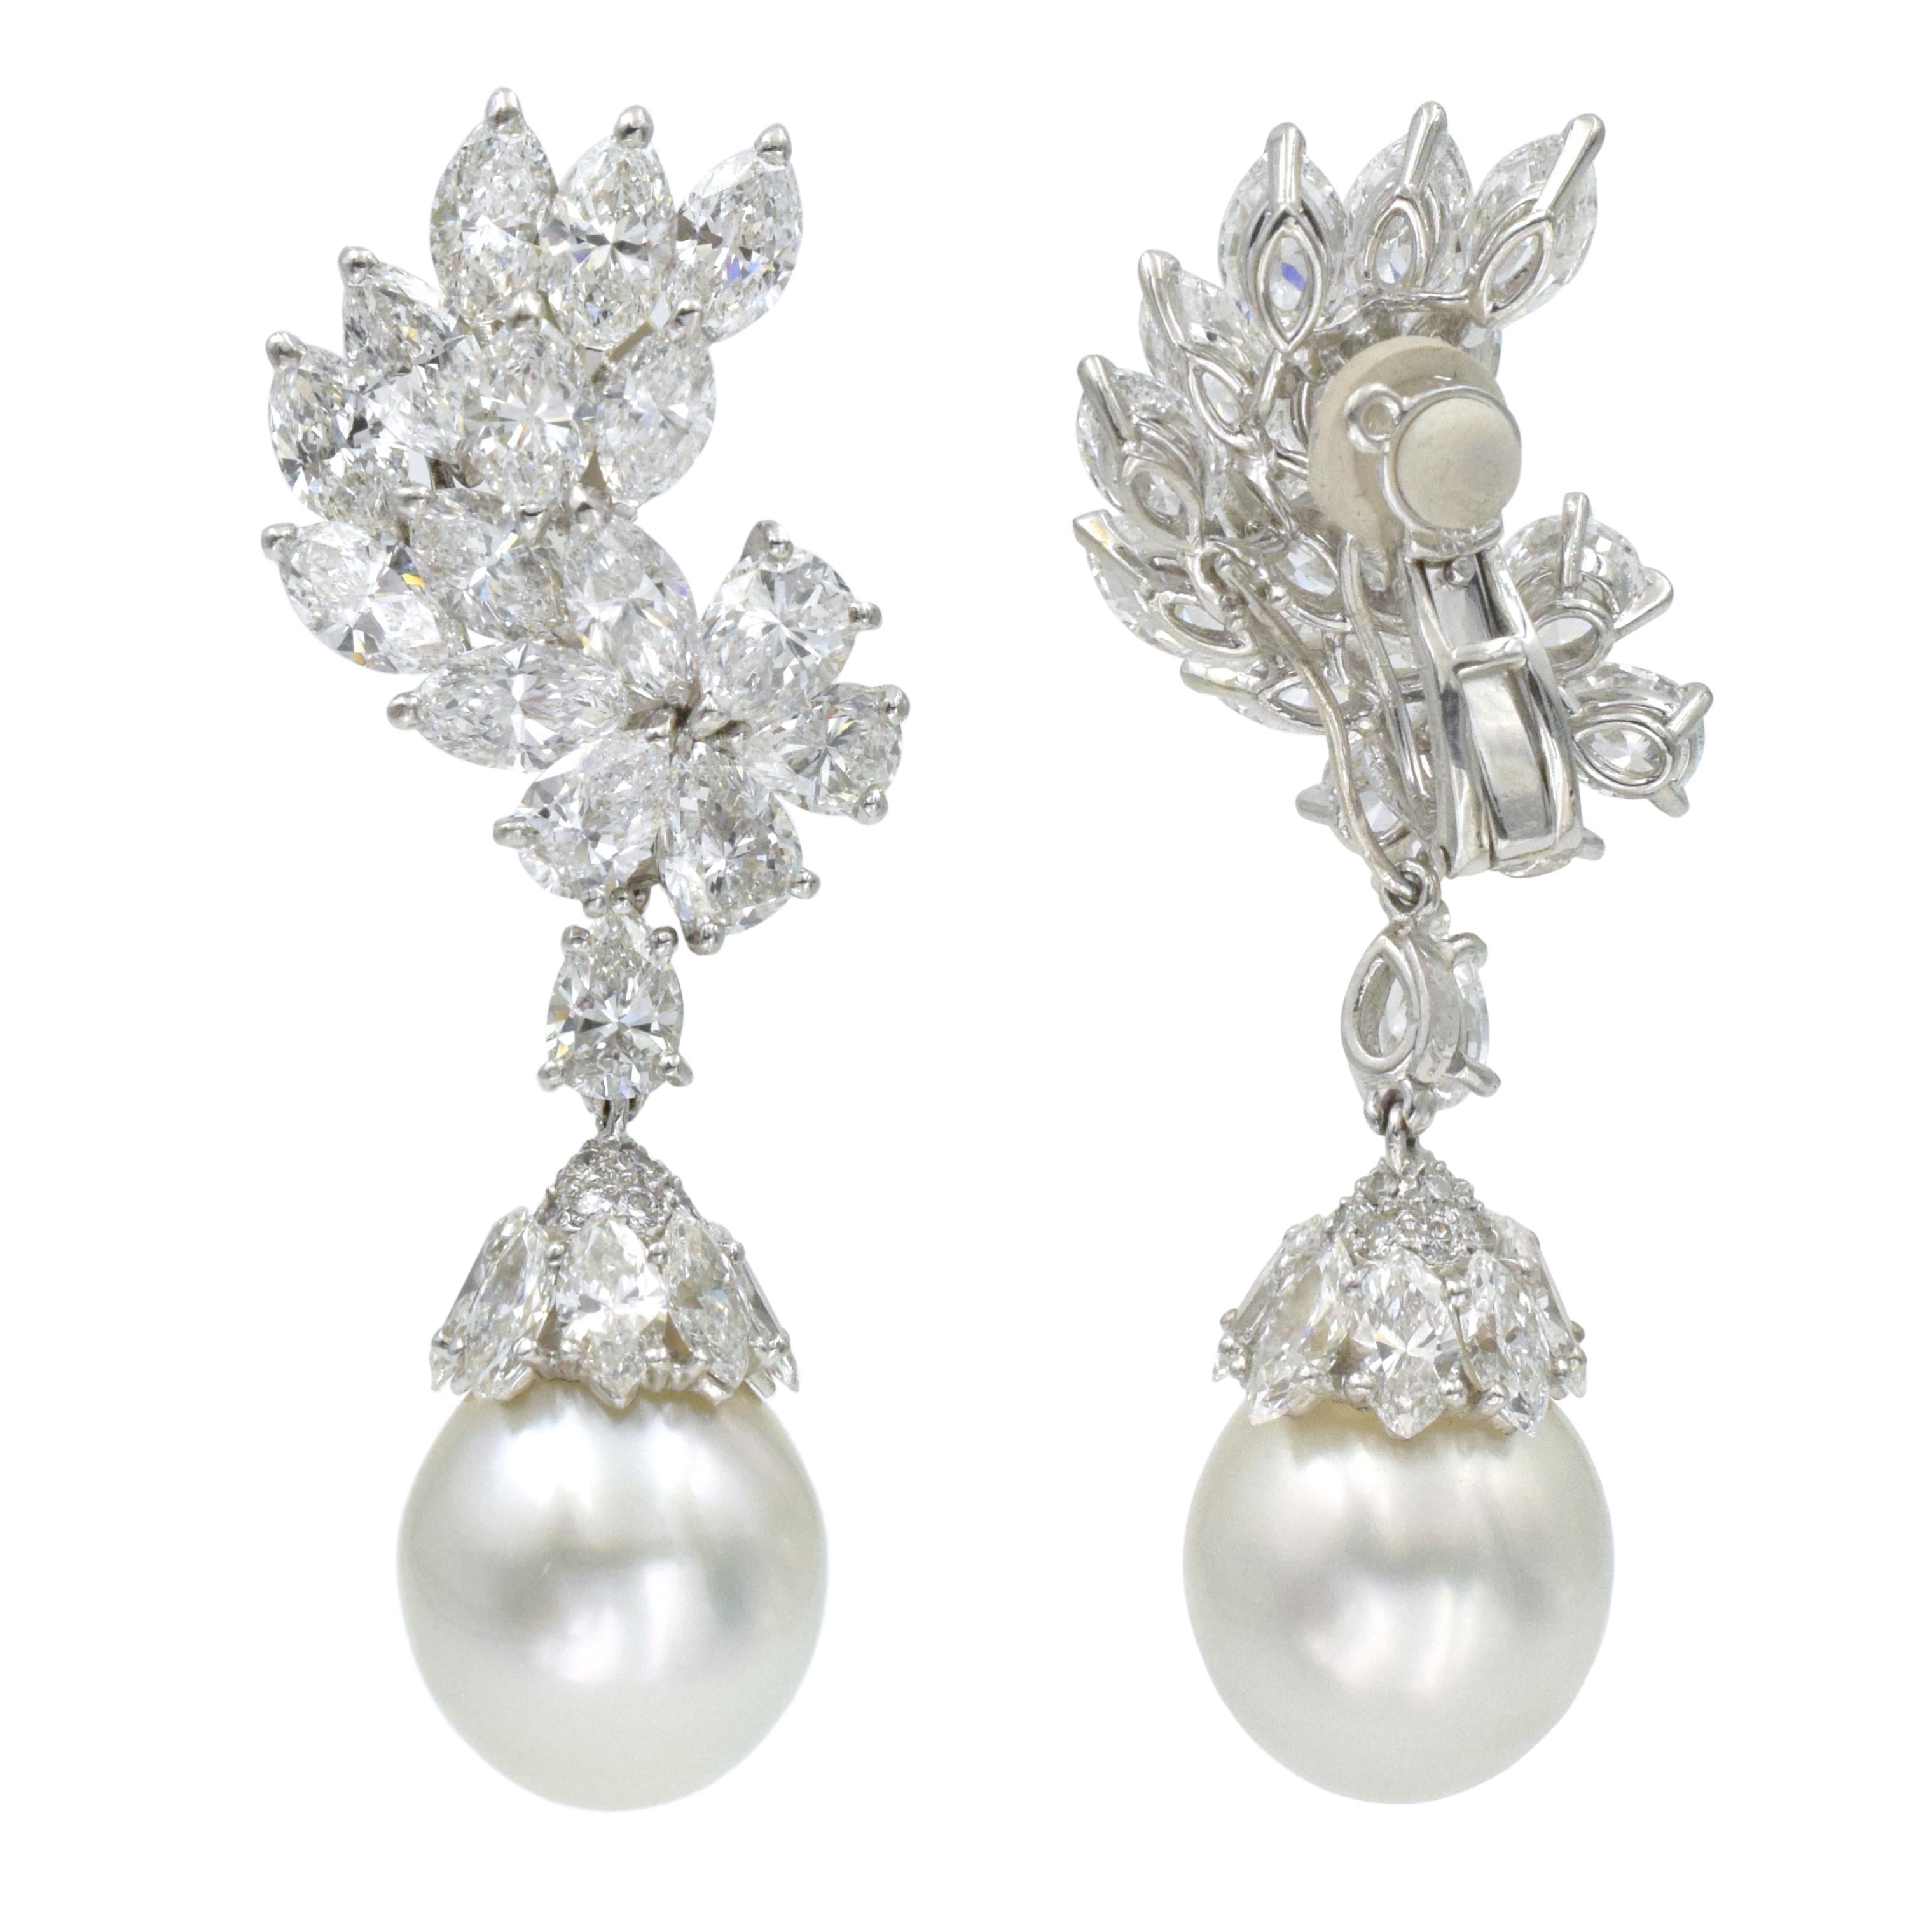 Cartier Diamond and South Sea Pearl Pendant-Earclip Earrings For Sale ...